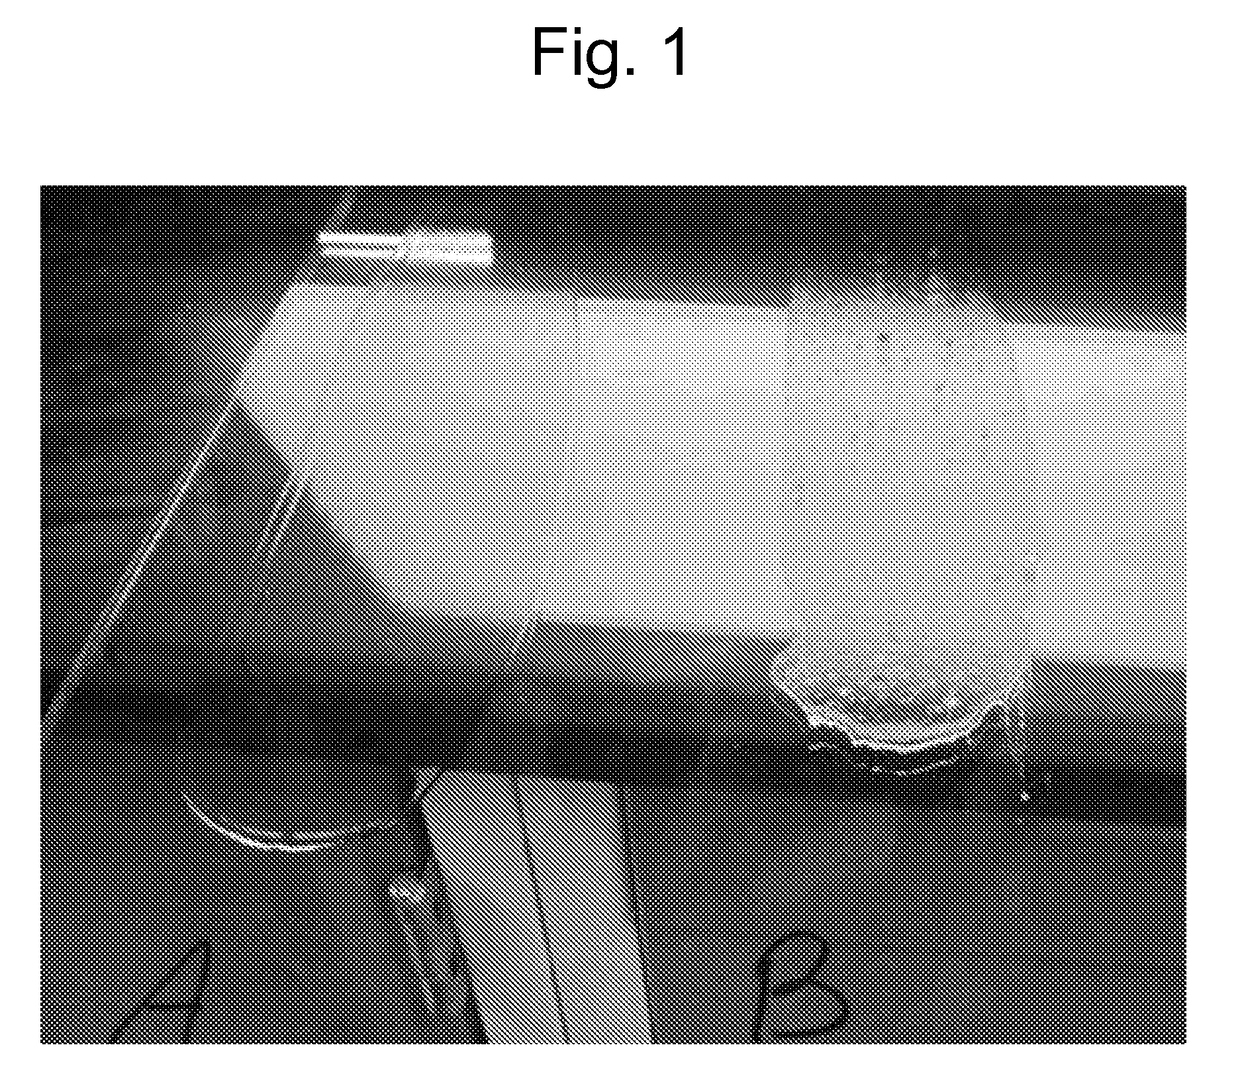 Method of preparing acrylic polymers and products produced thereby